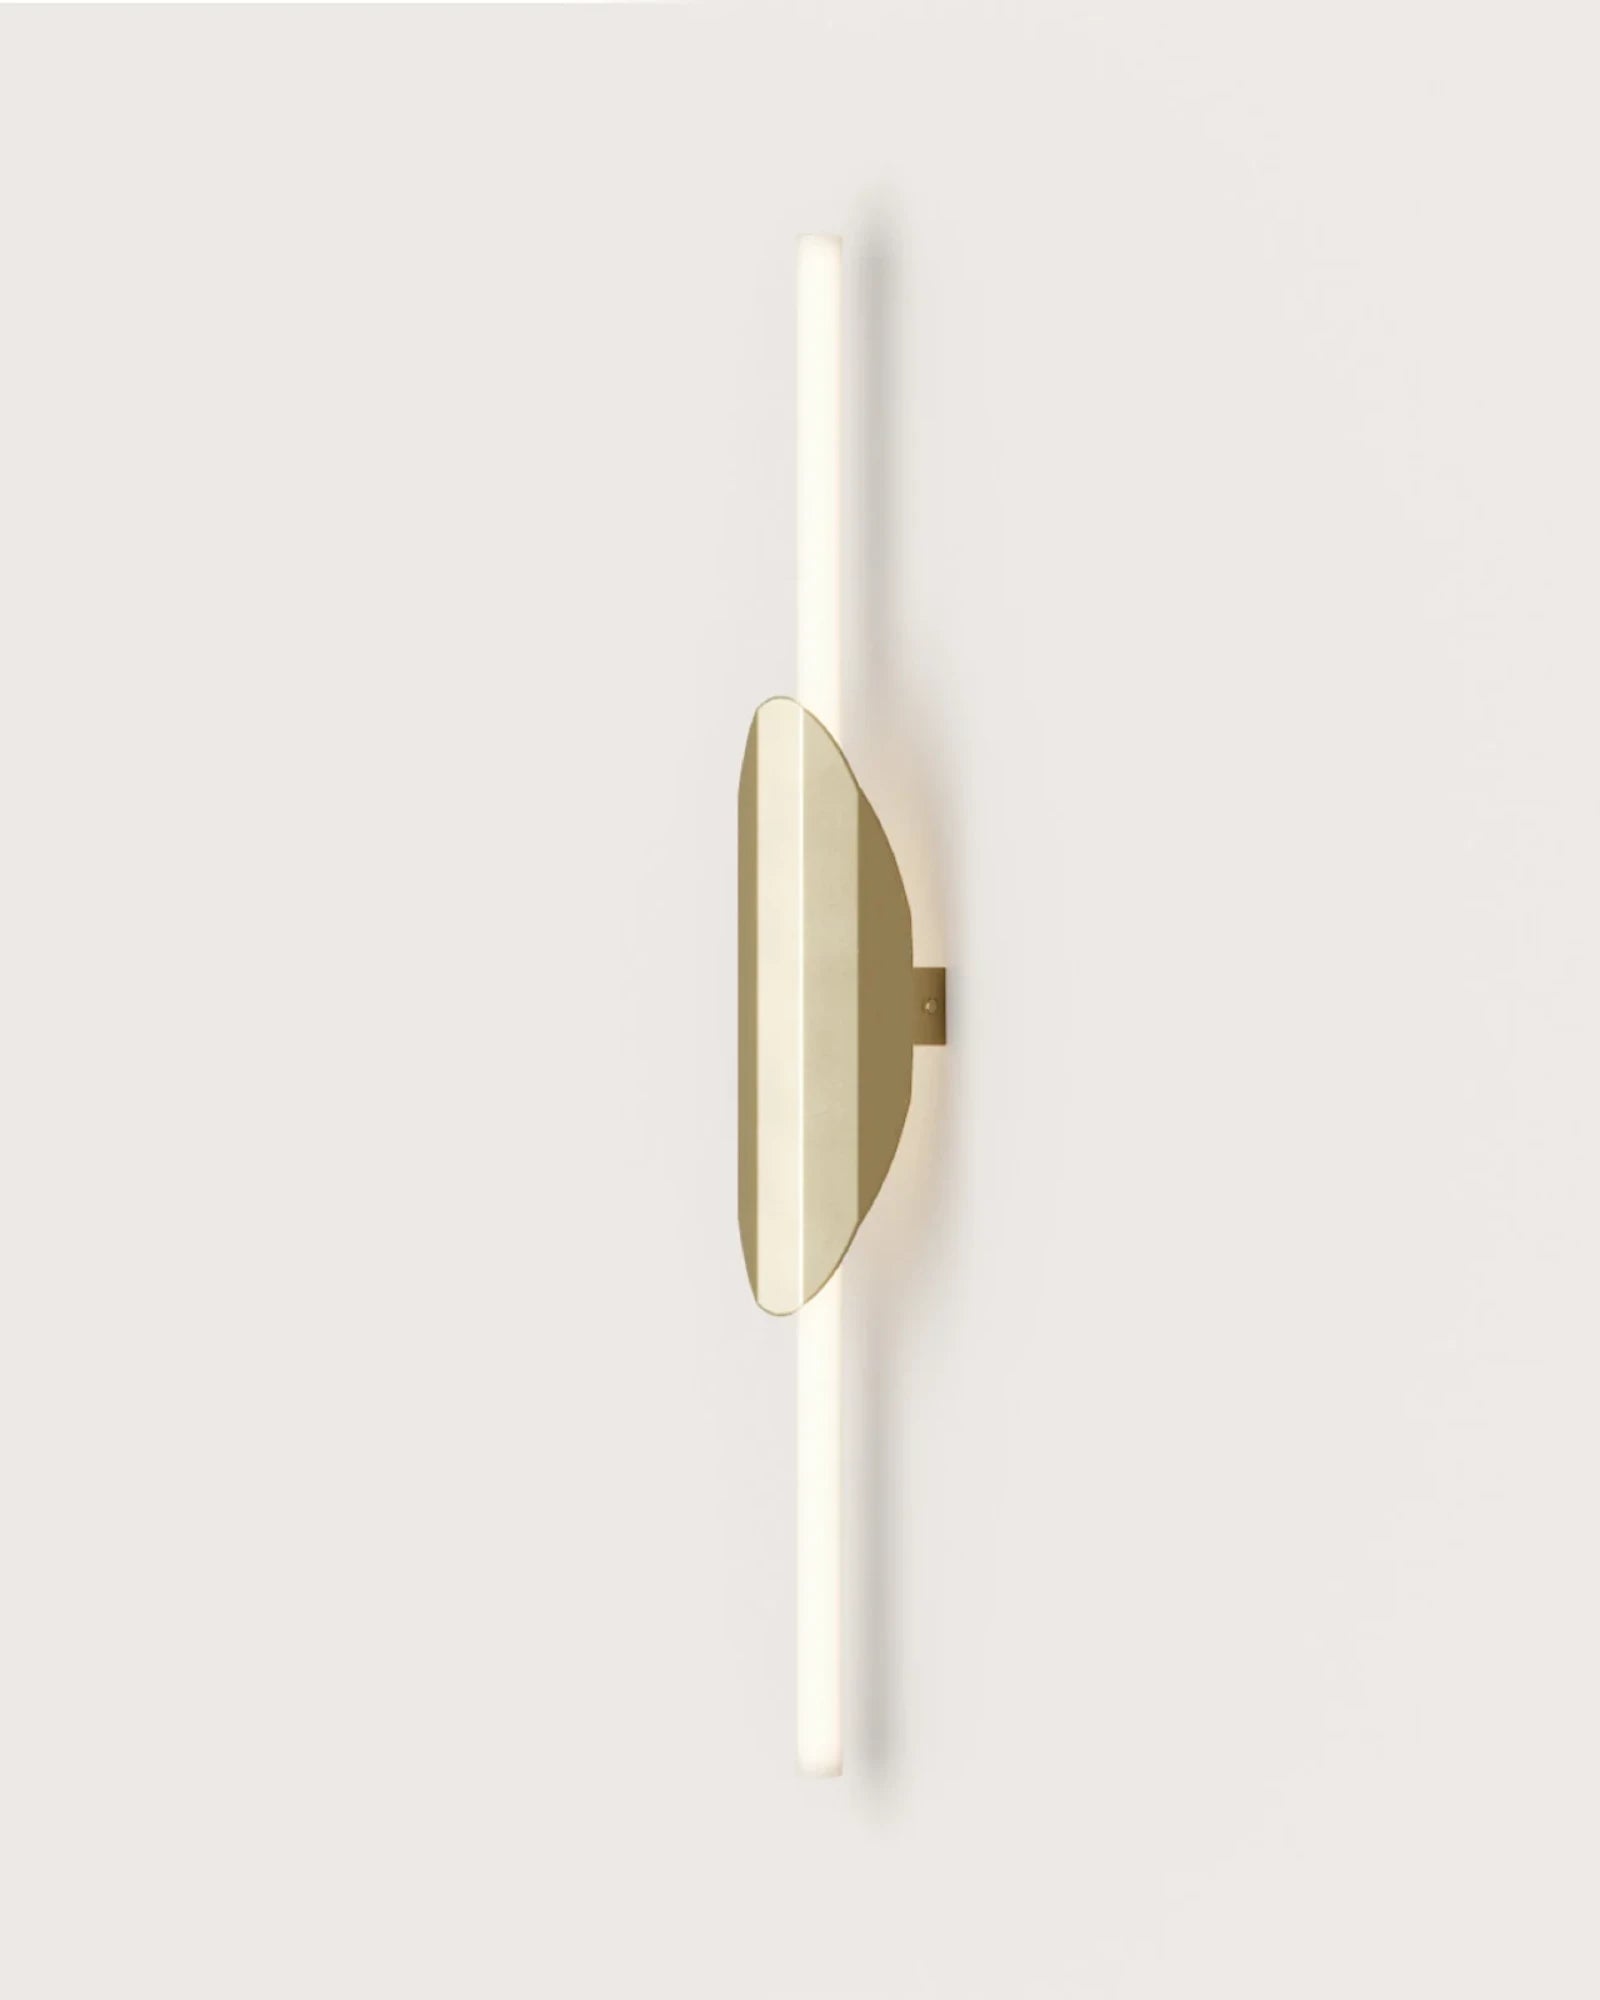 Xago Wall Light in Brass by Aromas Del Campo | Nook Collecitons